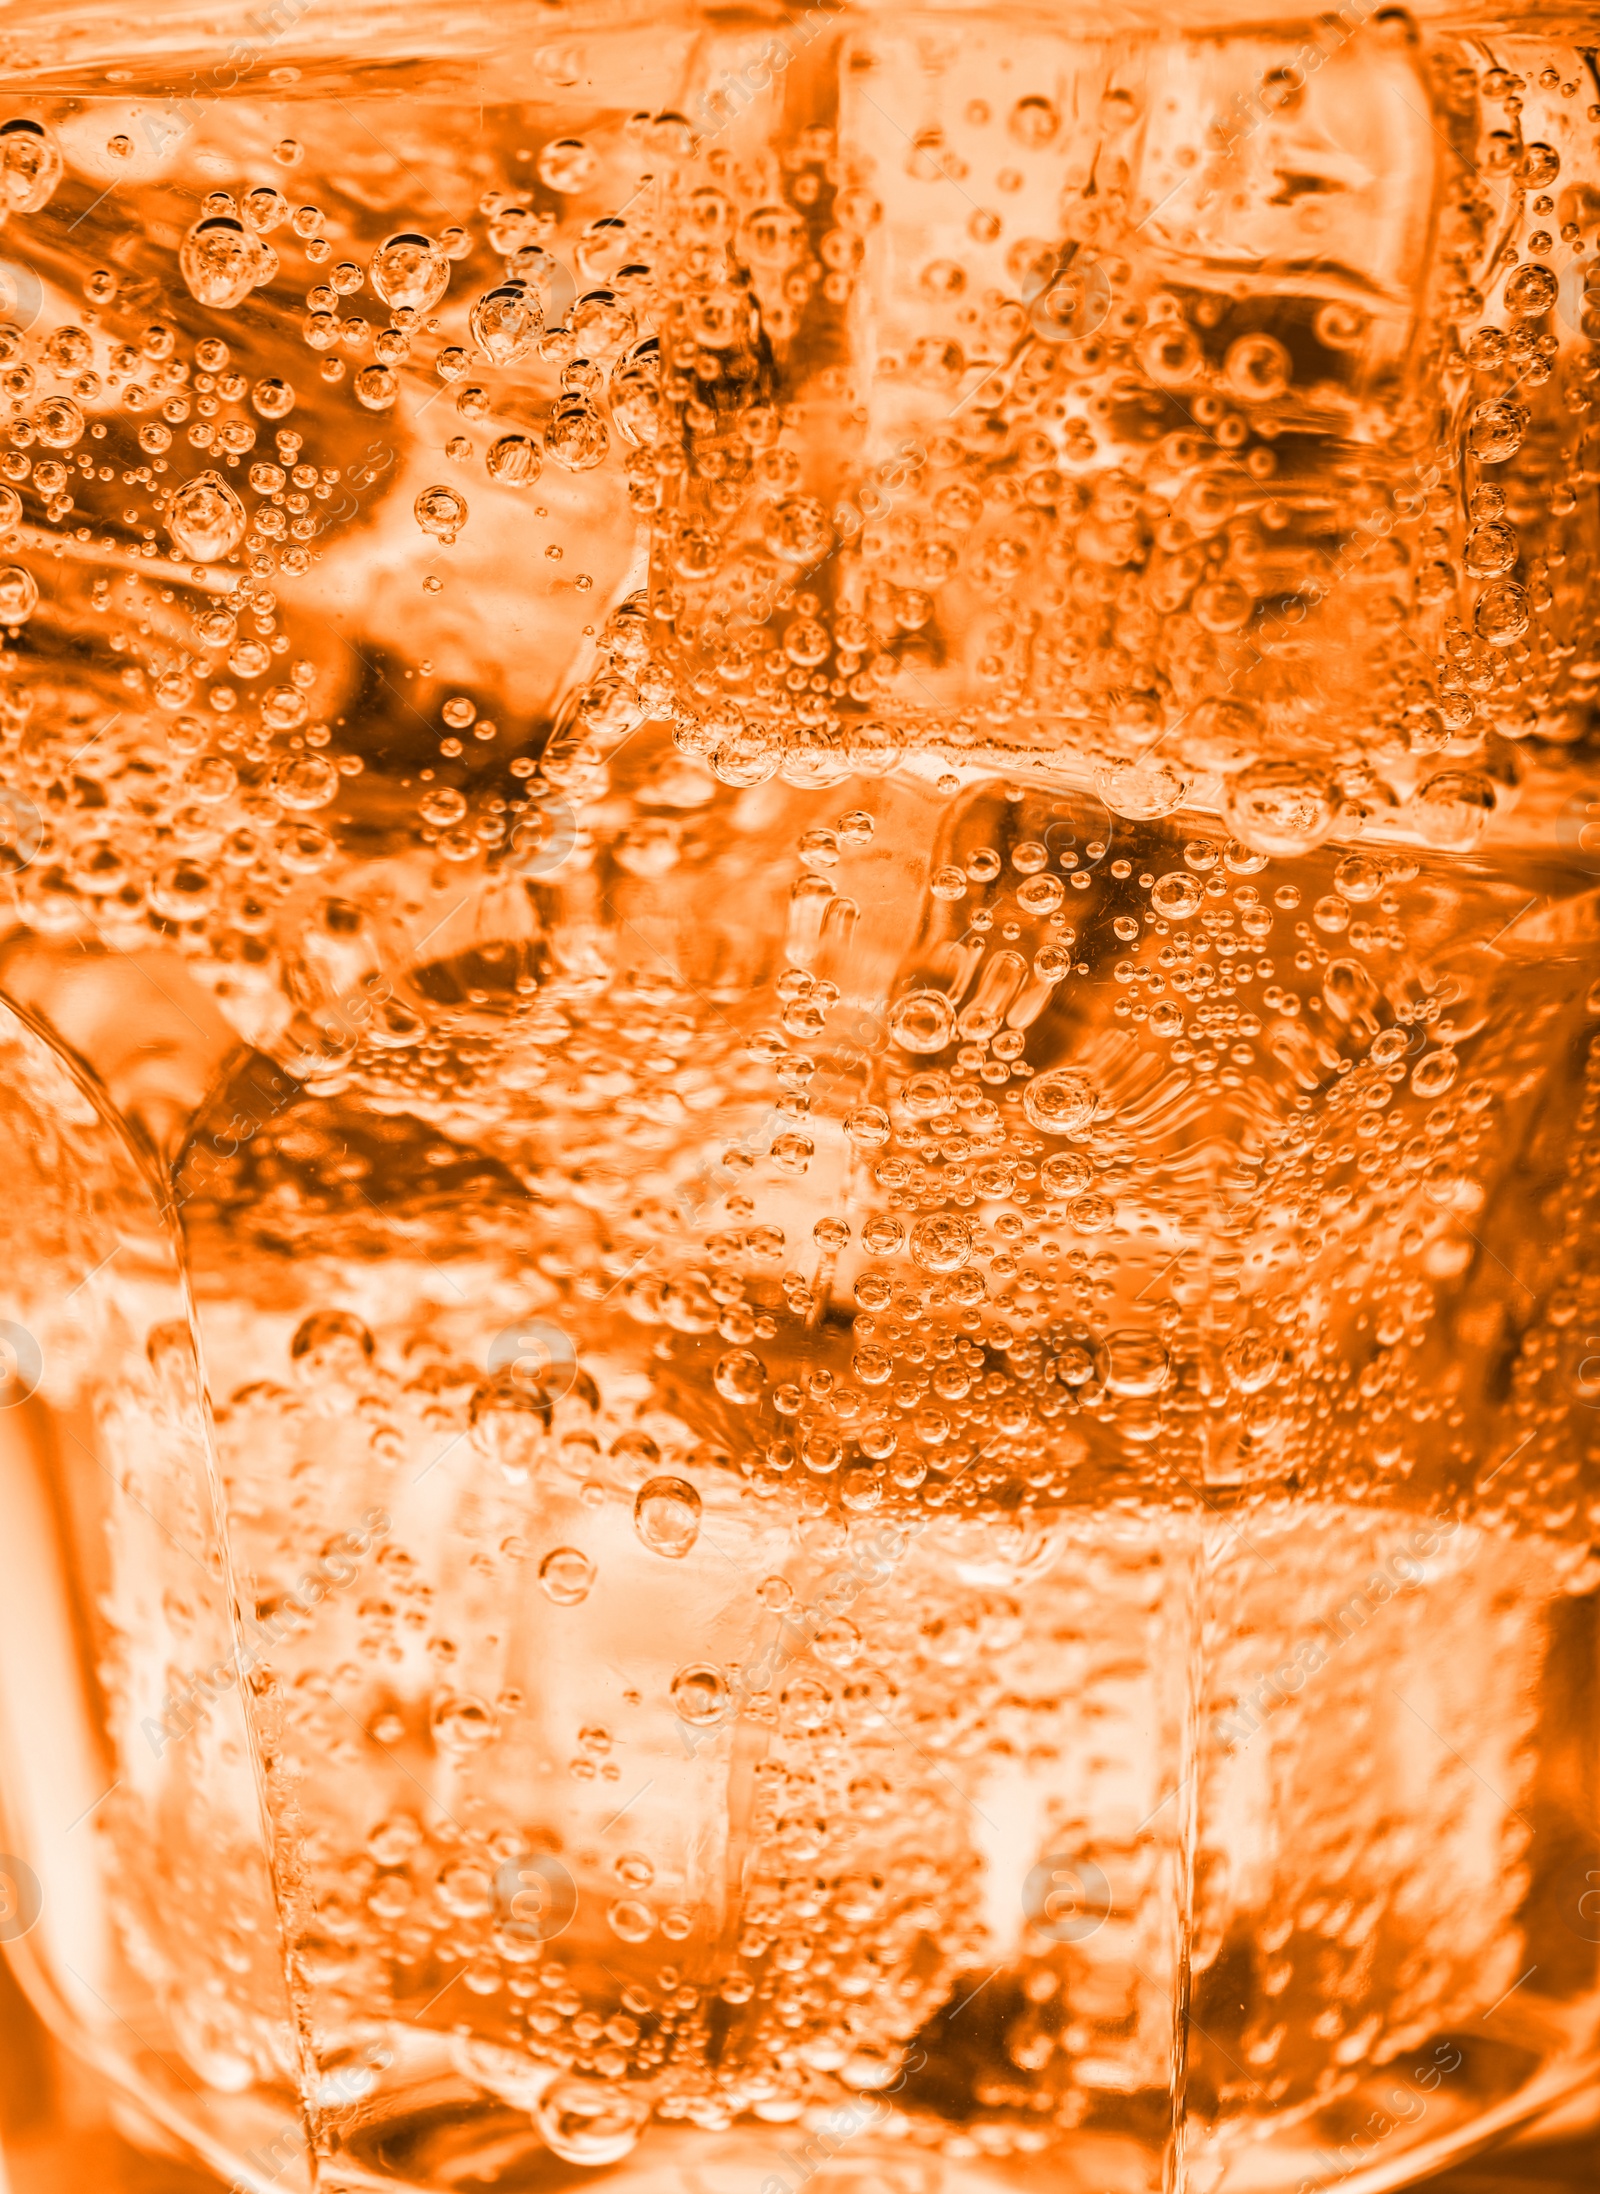 Image of Closeup view of soda water with ice in glass. Toned in glass